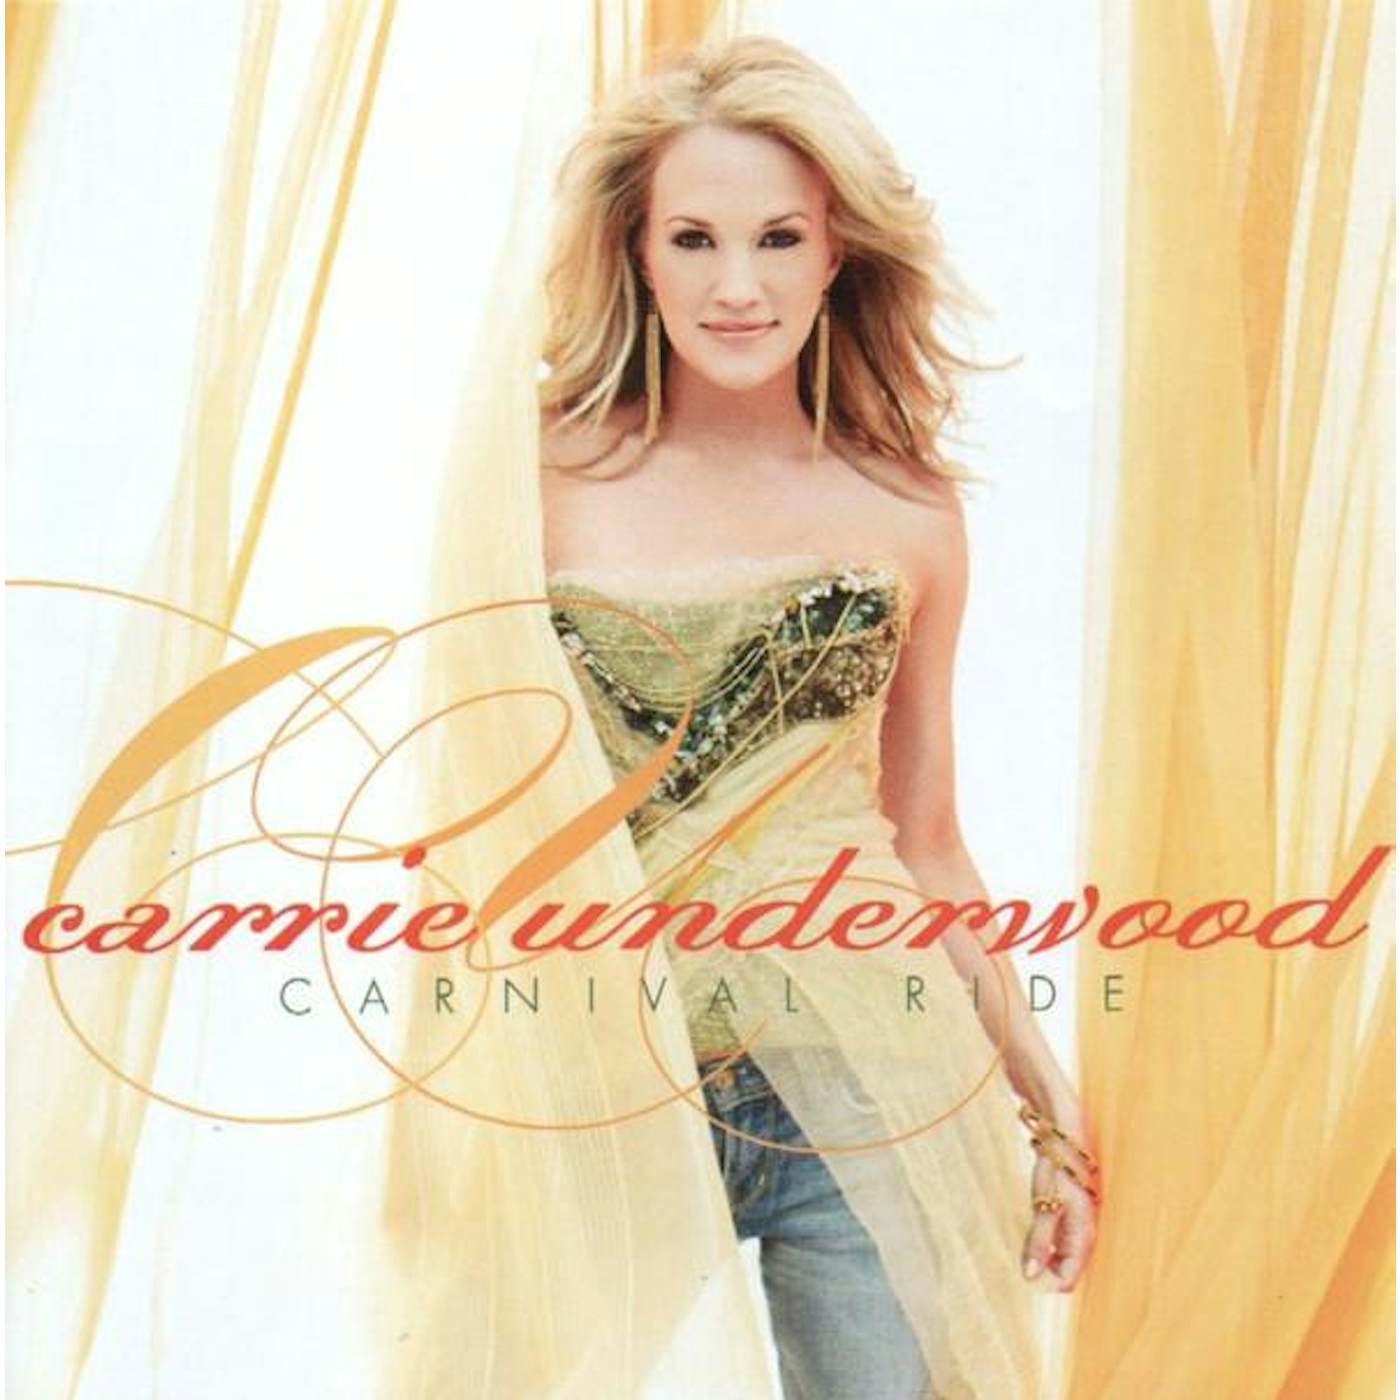 Carrie Underwood CARNIVAL RIDE CD